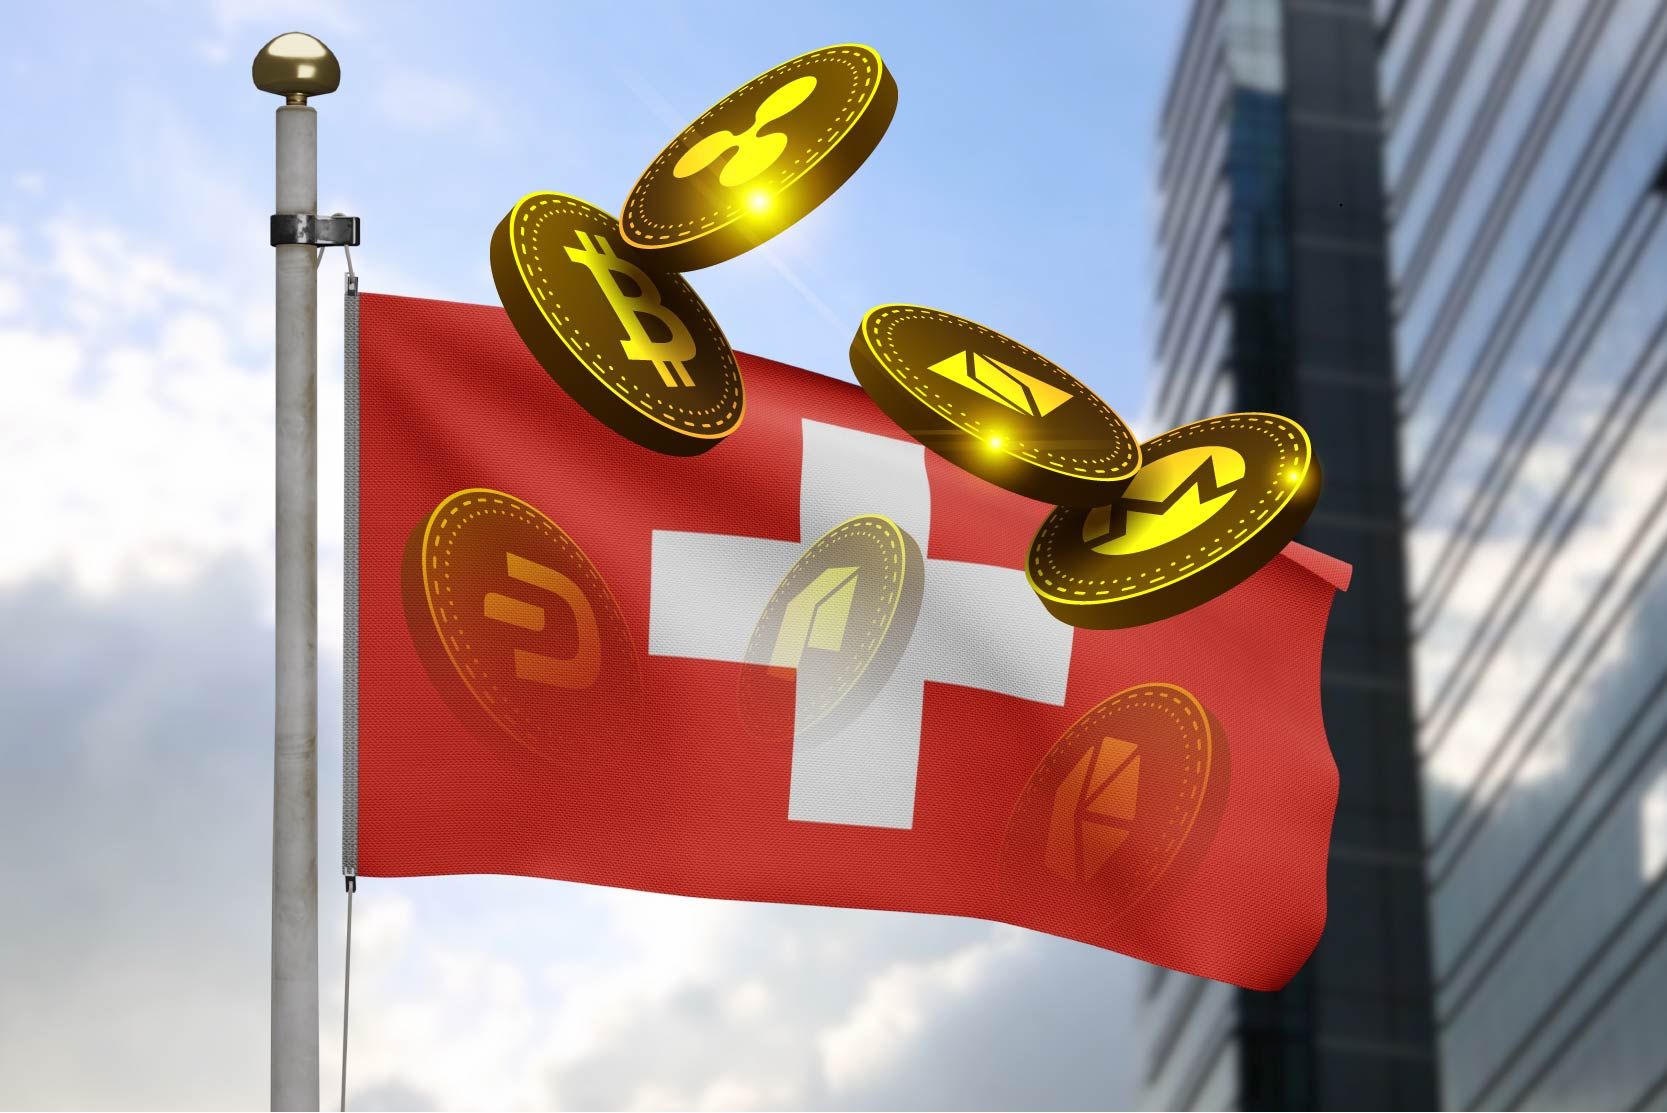 Swiss regulator FINMA approves first cryptocurrency fund